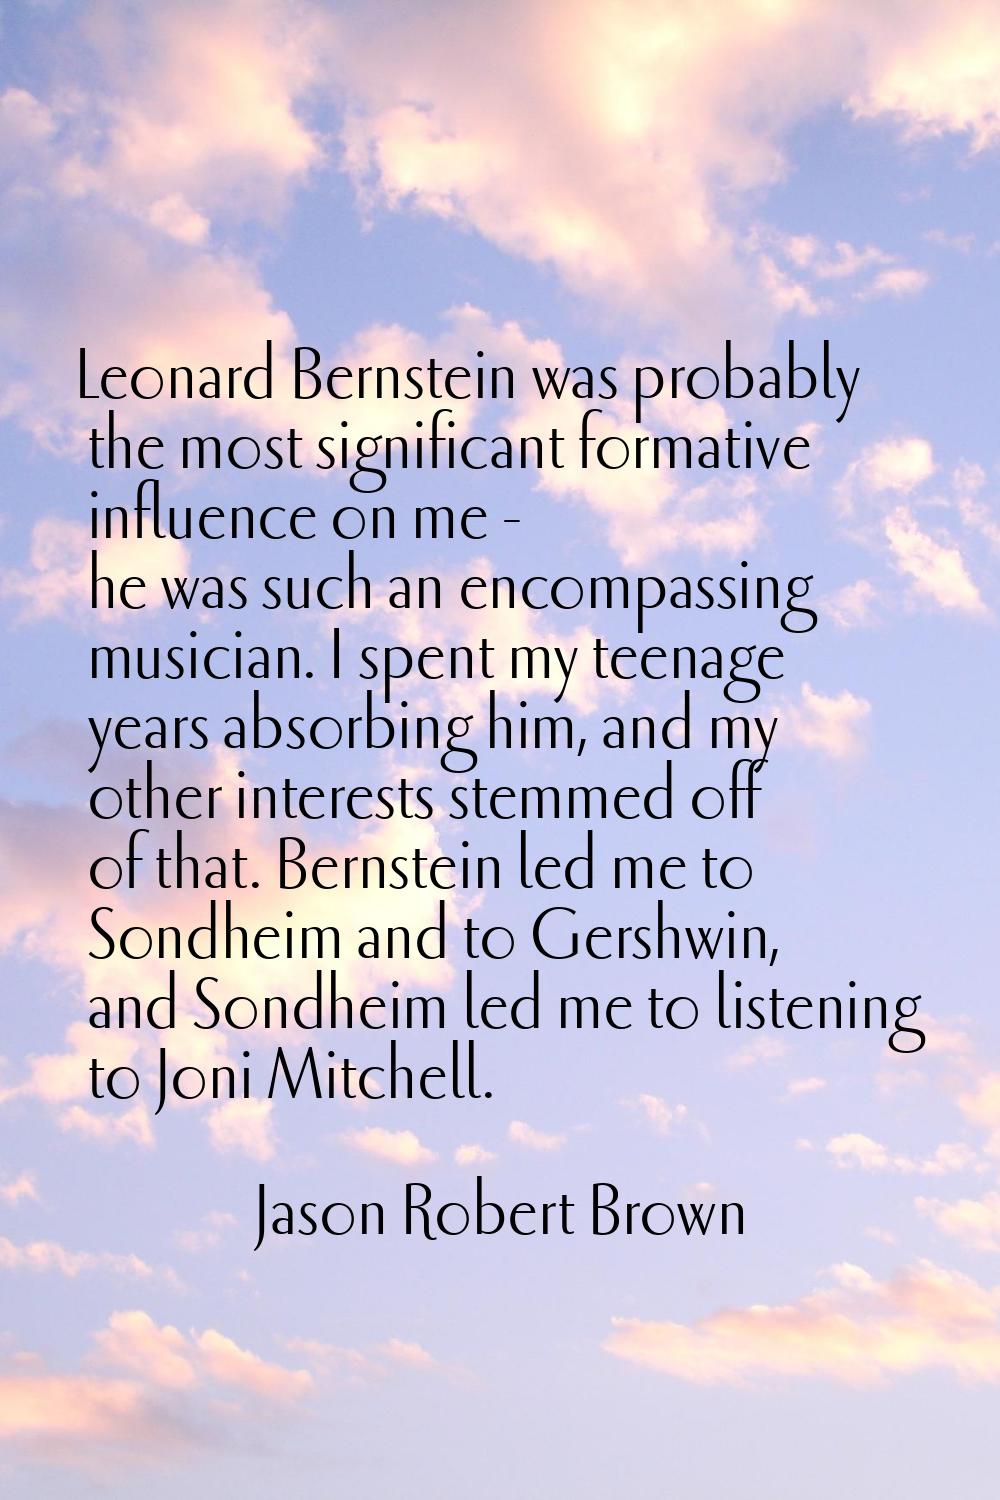 Leonard Bernstein was probably the most significant formative influence on me - he was such an enco